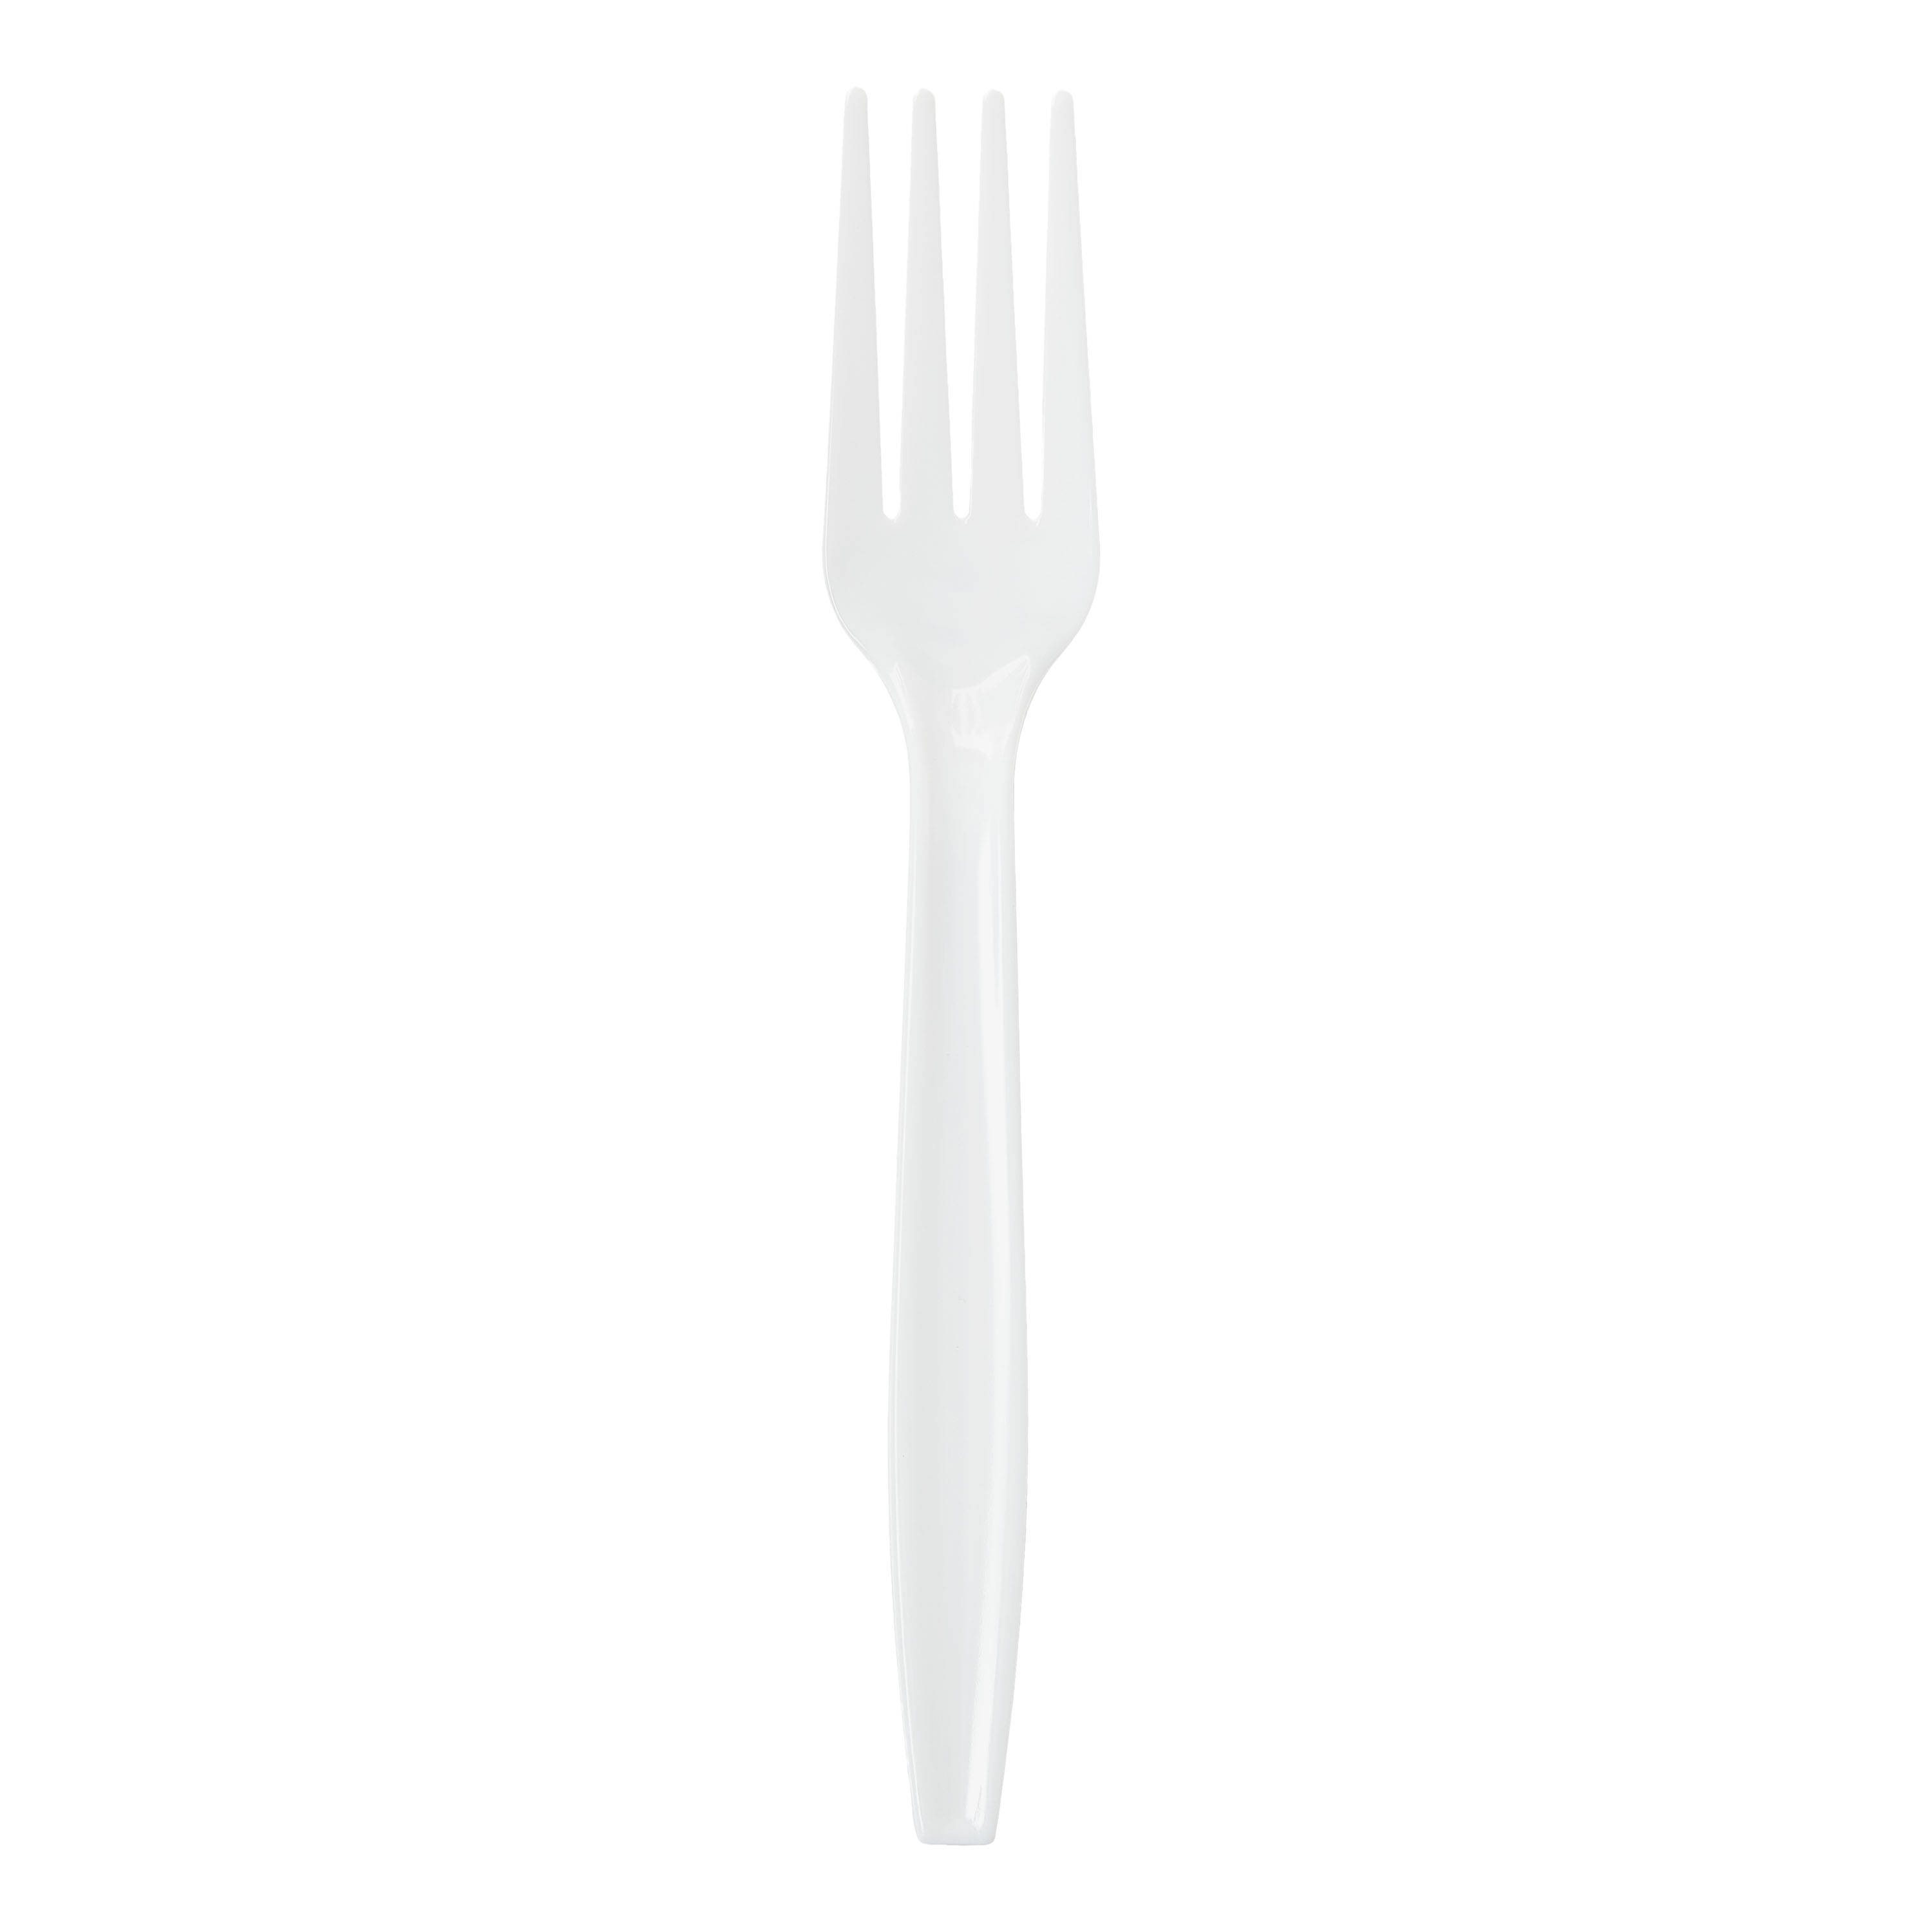 Great Value Everyday Disposable Plastic Forks, White, 100 Count - image 5 of 8